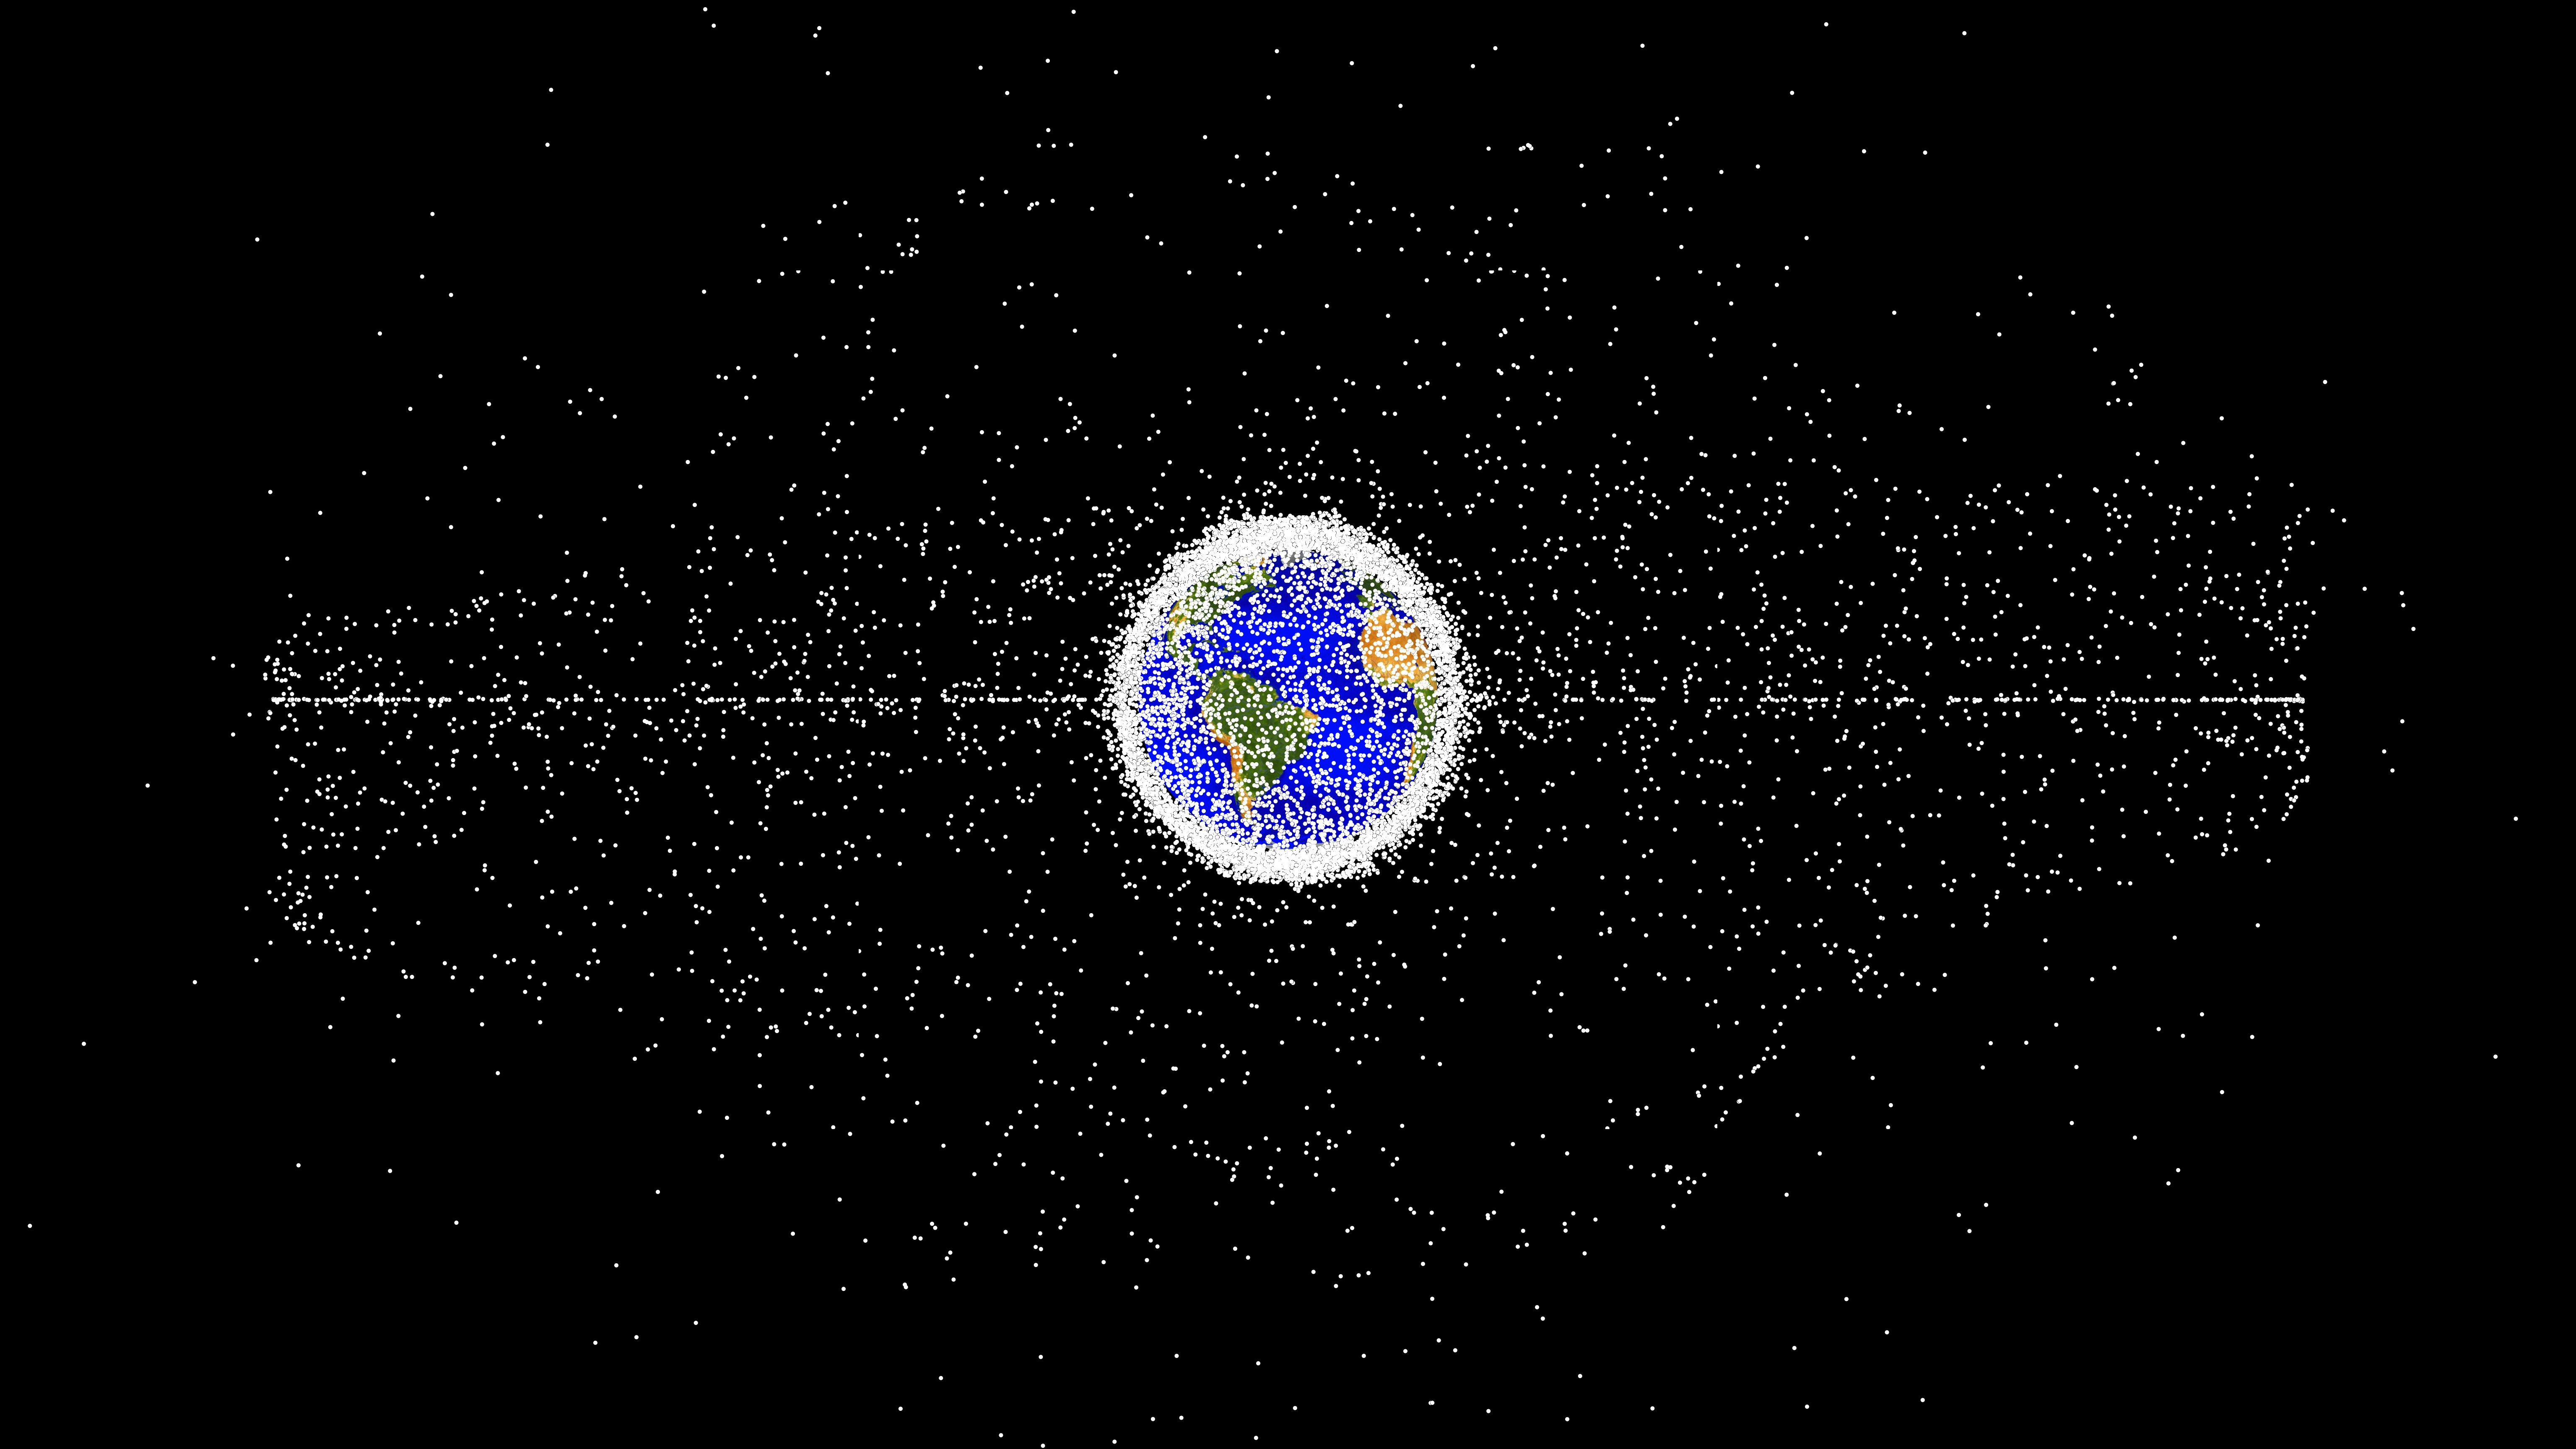  Studying space weather can help address space debris. Here's how 